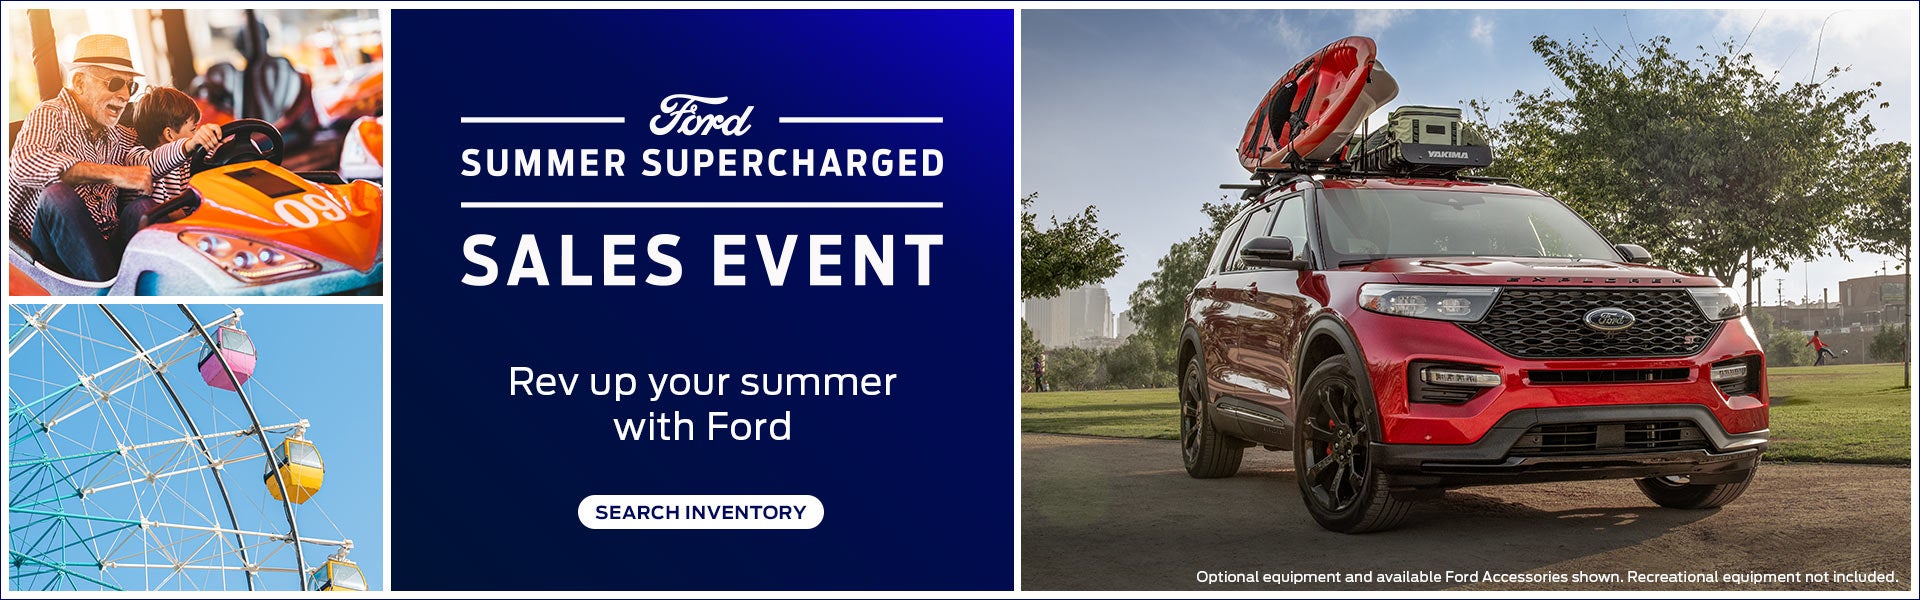 Summer Supercharged Sales Event 